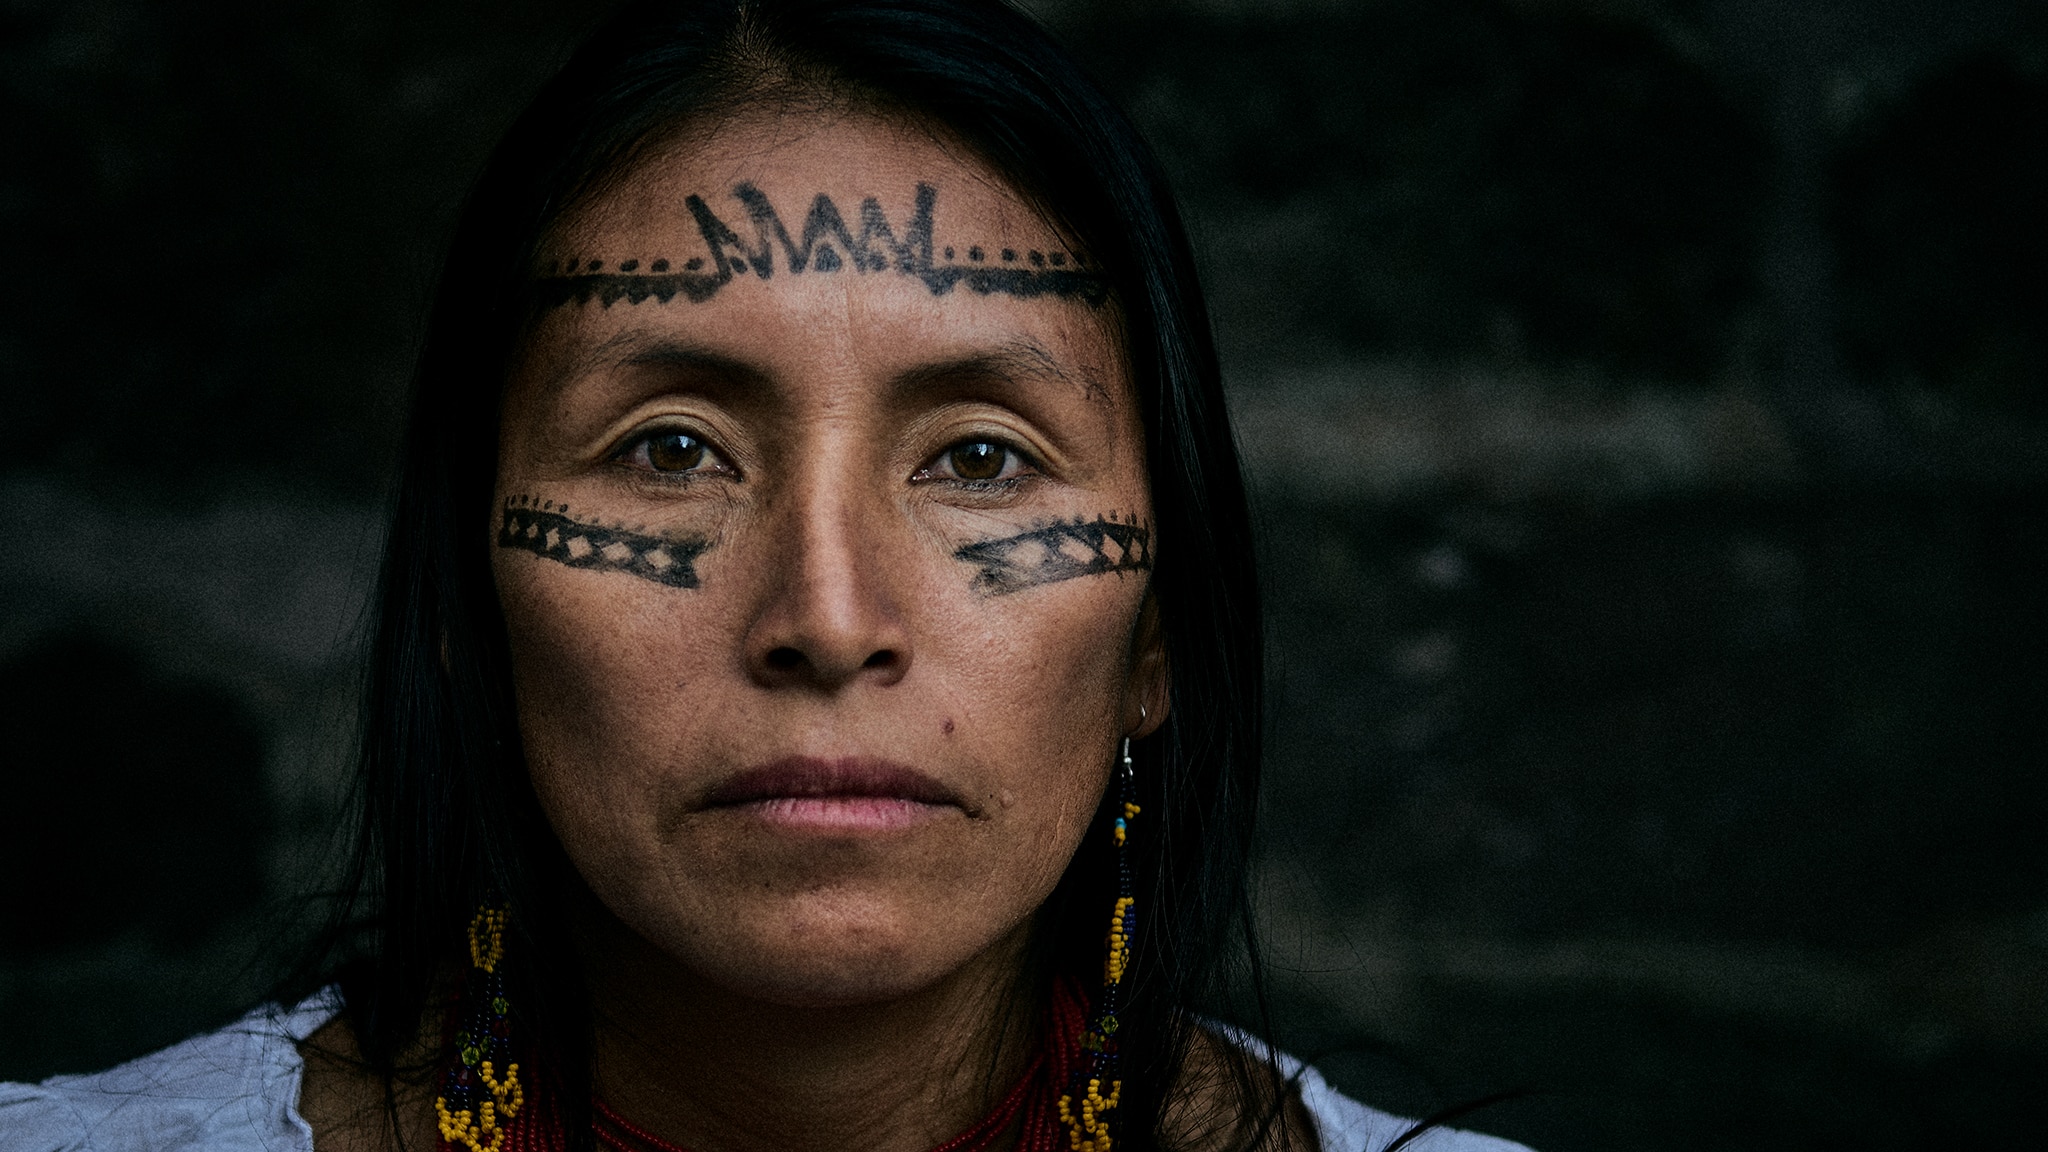 A close-up image of Salome Aranda. She is an Indigenous woman with painted markings on her face. She wears beaded earrings and a white shirt.